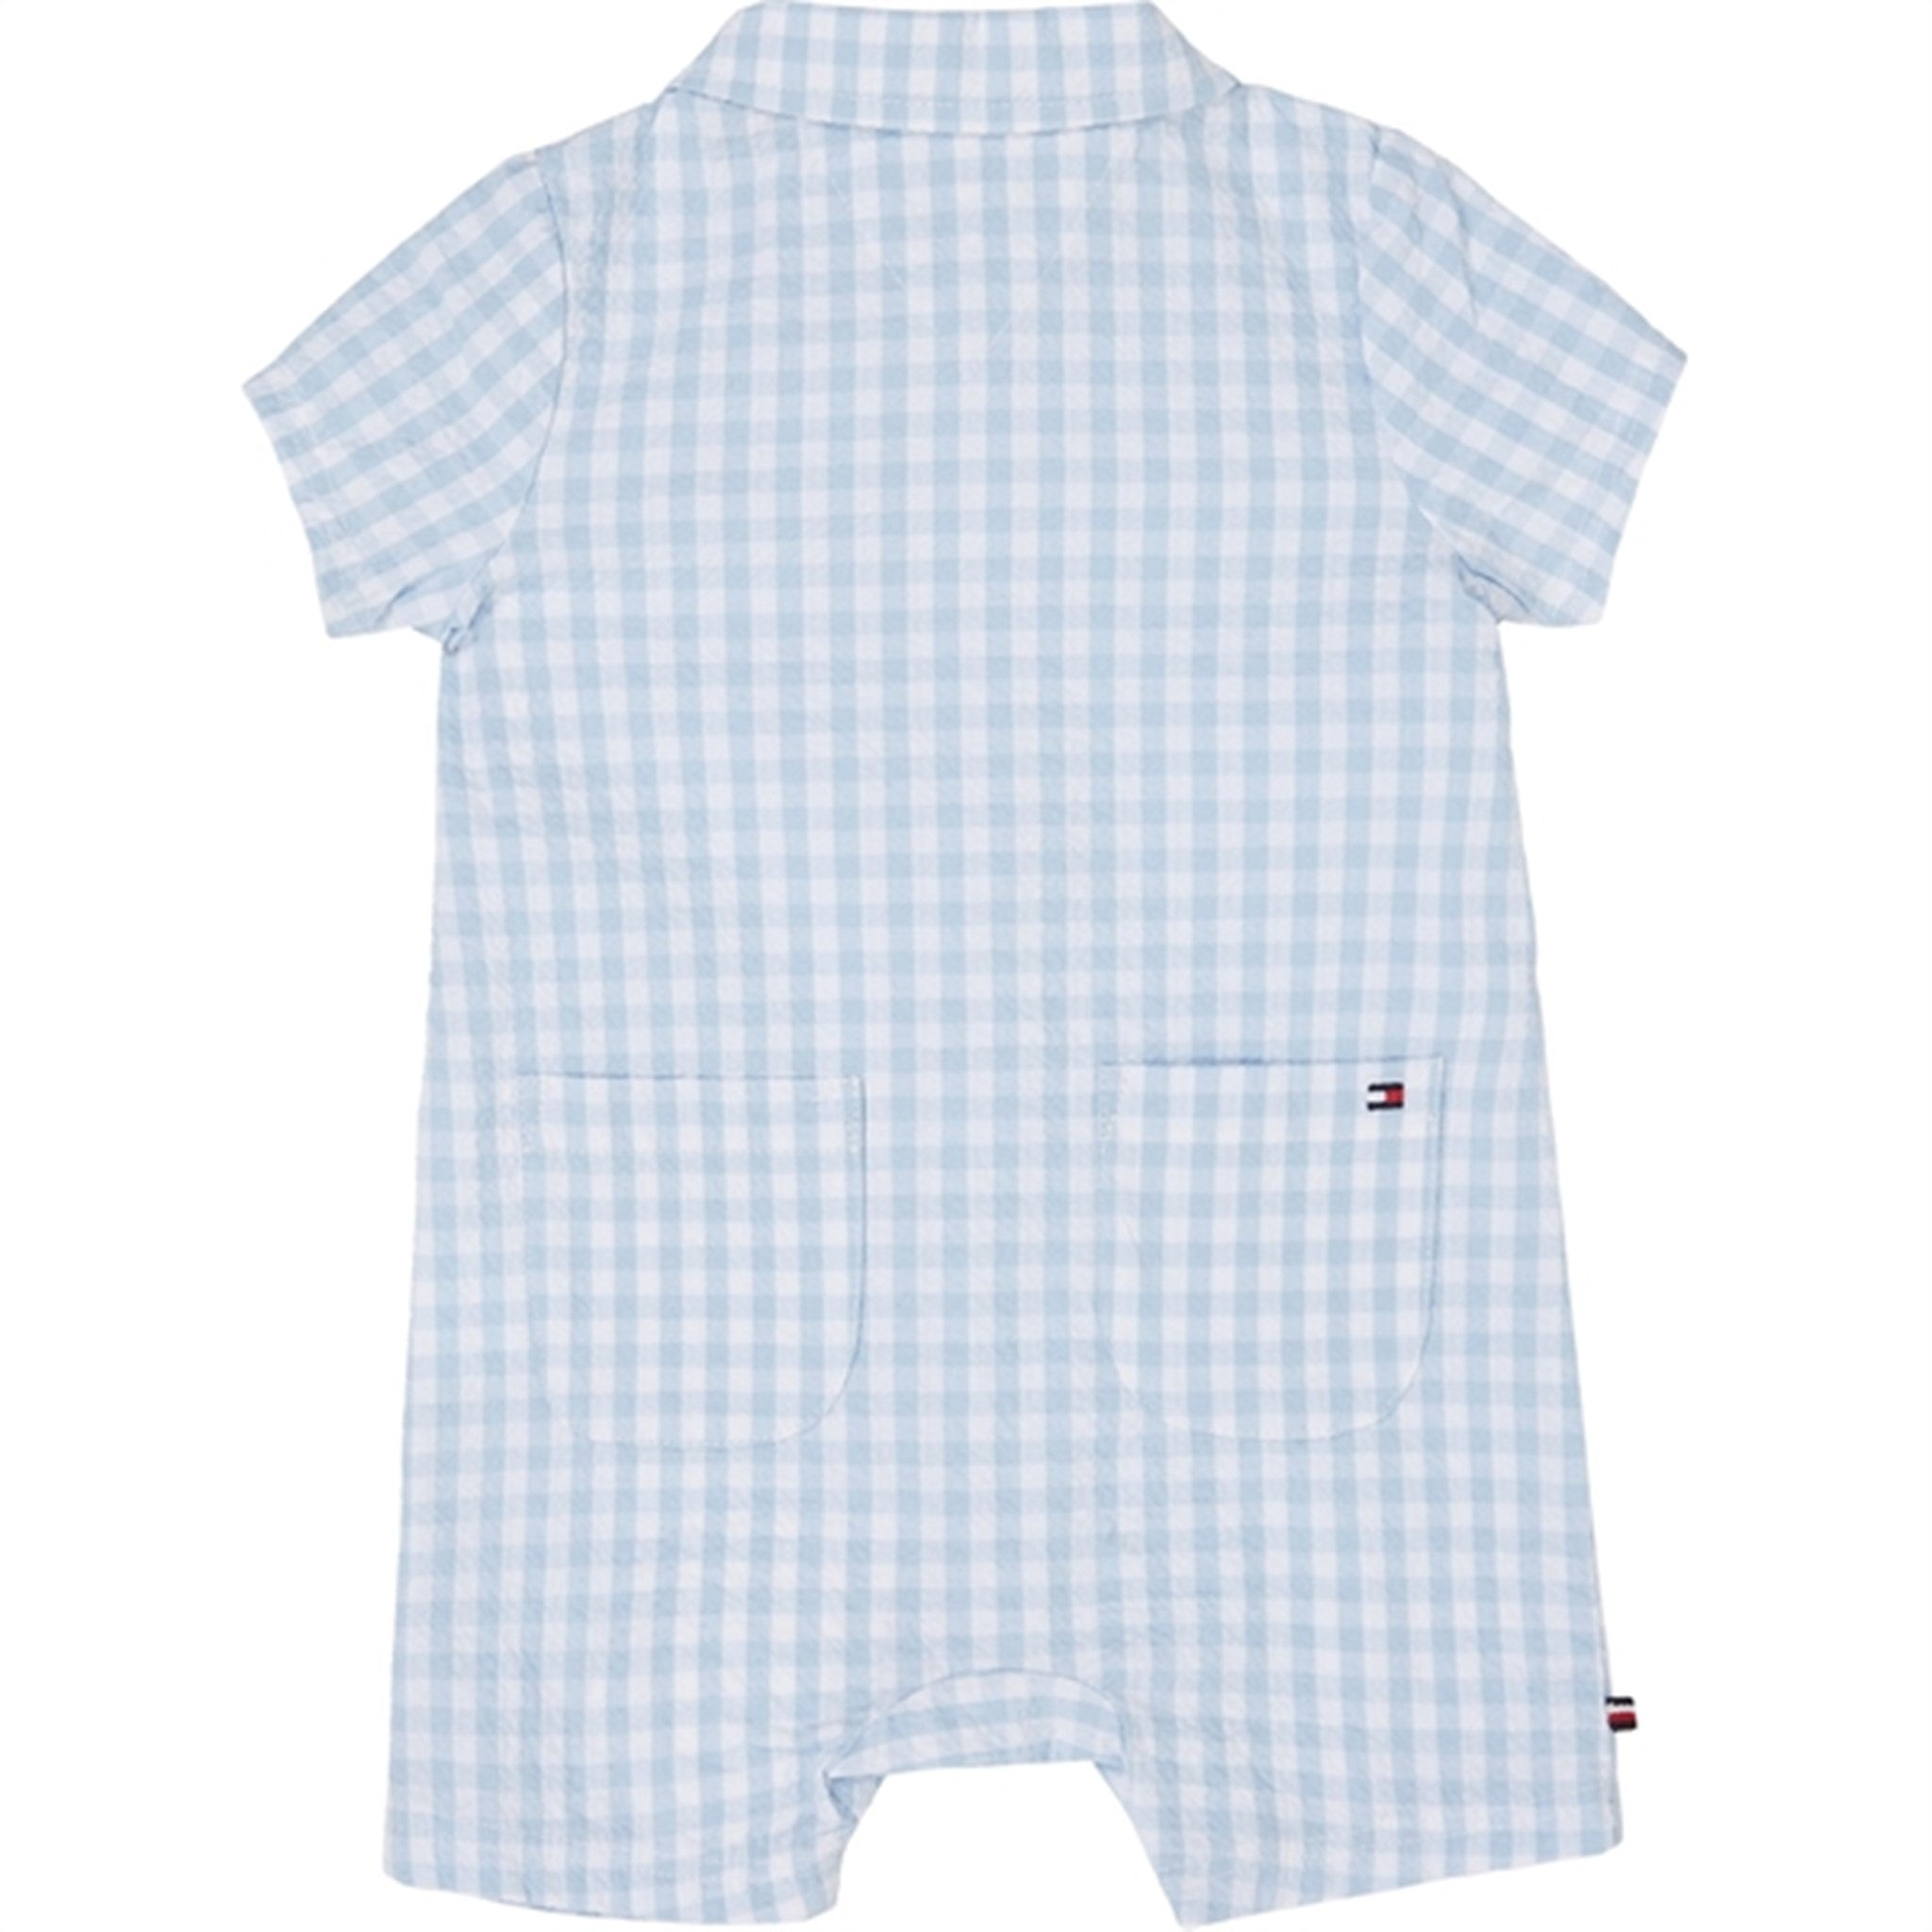 Tommy Hilfiger Baby Gingham Sommersuit White / Blue Check 3